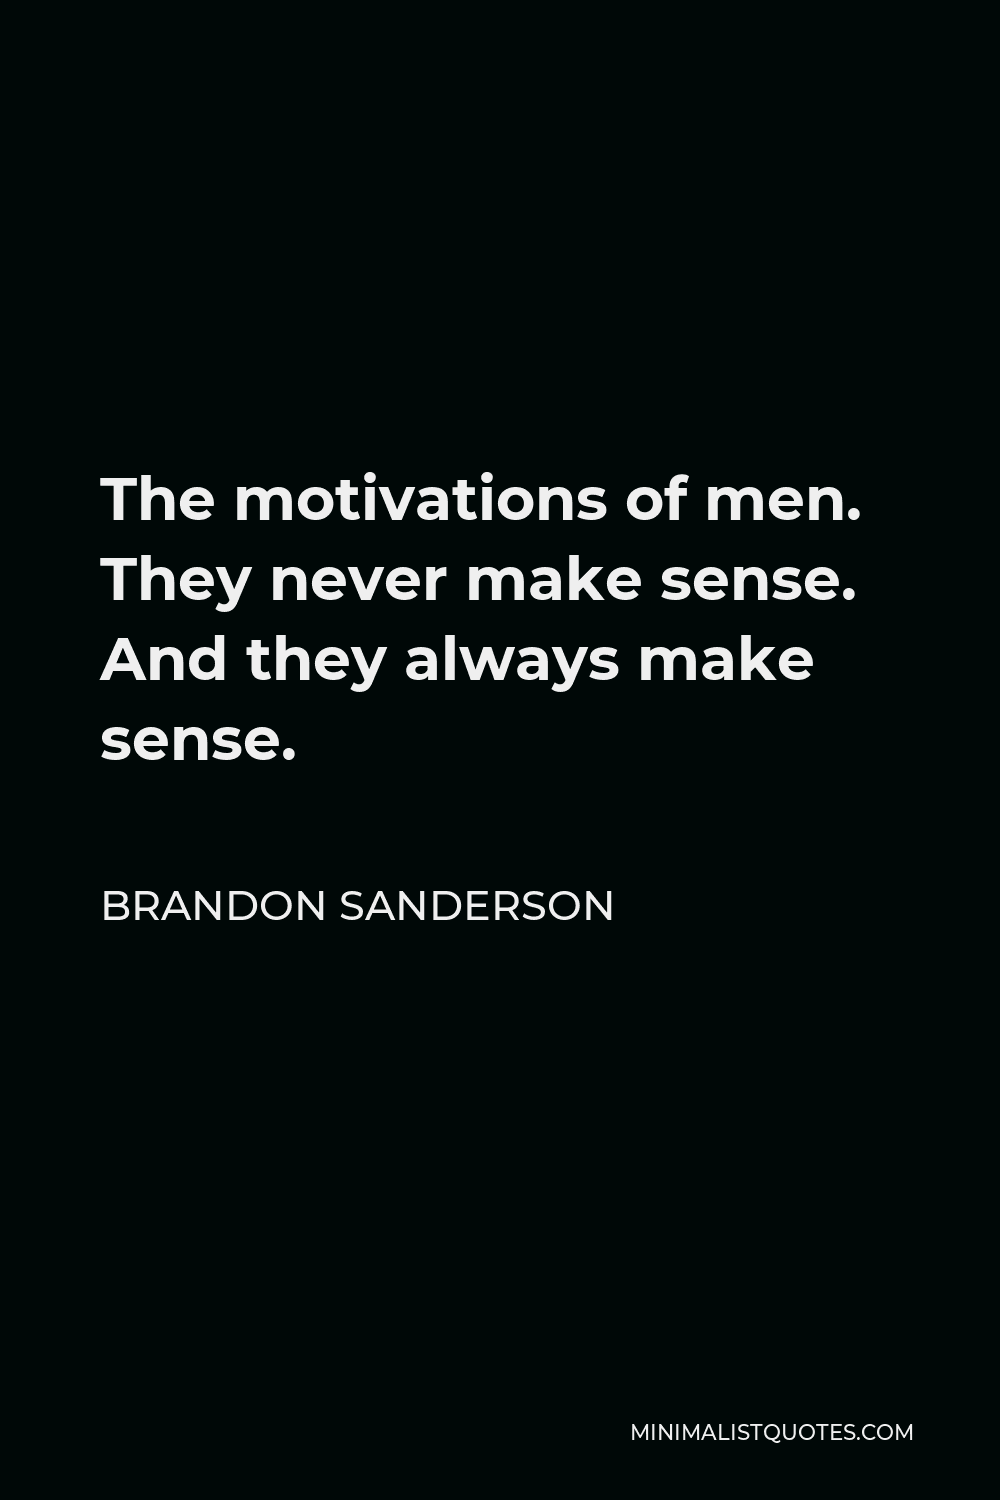 Brandon Sanderson Quote - The motivations of men. They never make sense. And they always make sense.